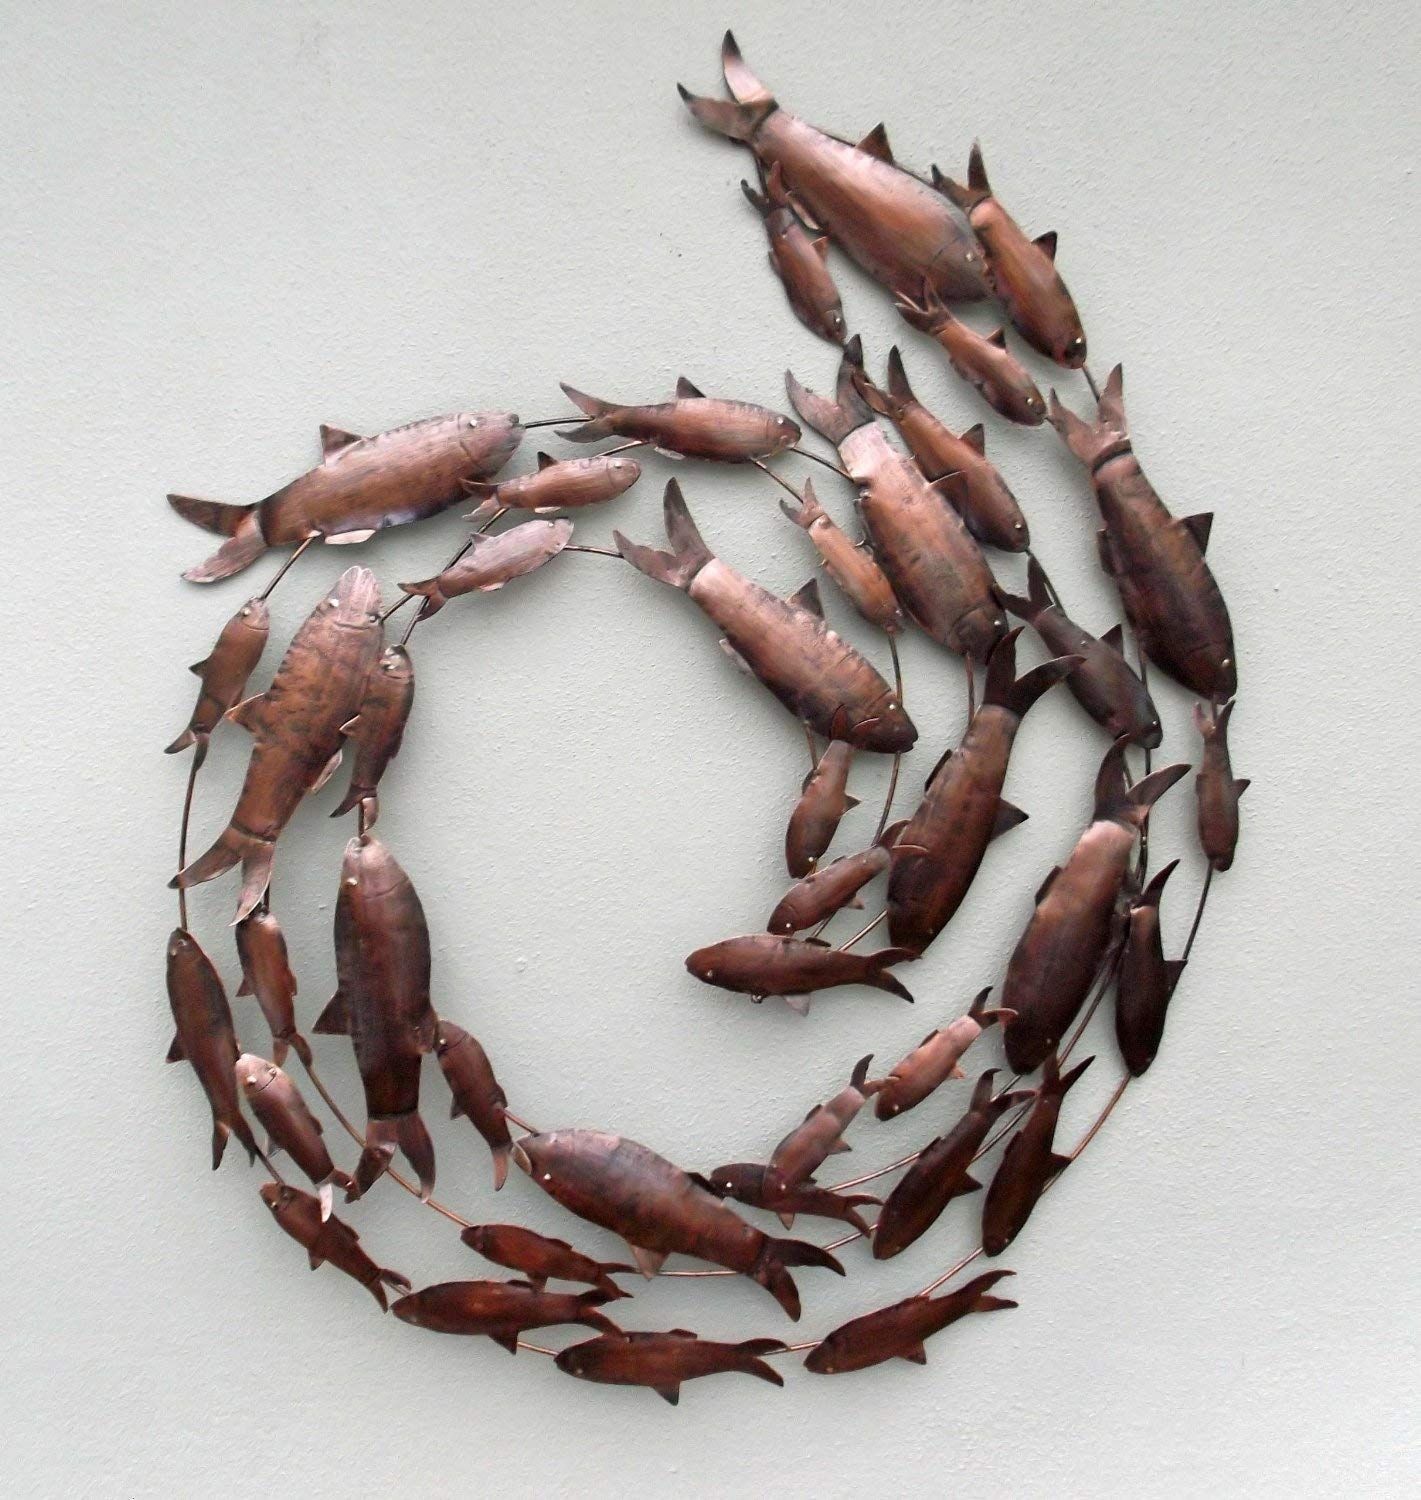 Buy Craftter Metal Handcrafted Fish Circle Antique Wall Art With Regard To Metal Wall Art Sculptures (View 13 of 20)